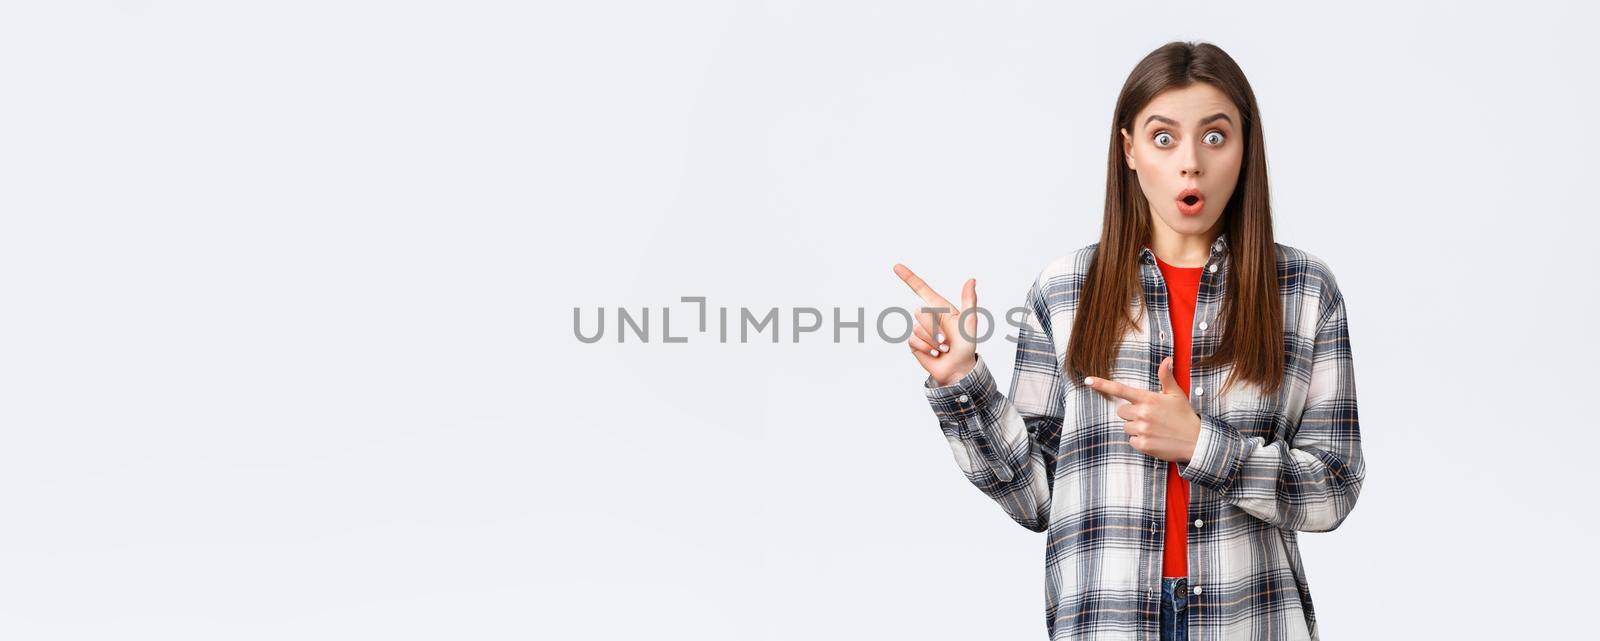 Lifestyle, different emotions, leisure activities concept. Impressed female customer, girl in casual checked shirt, say wow talking about news and pointing fingers left, white background.